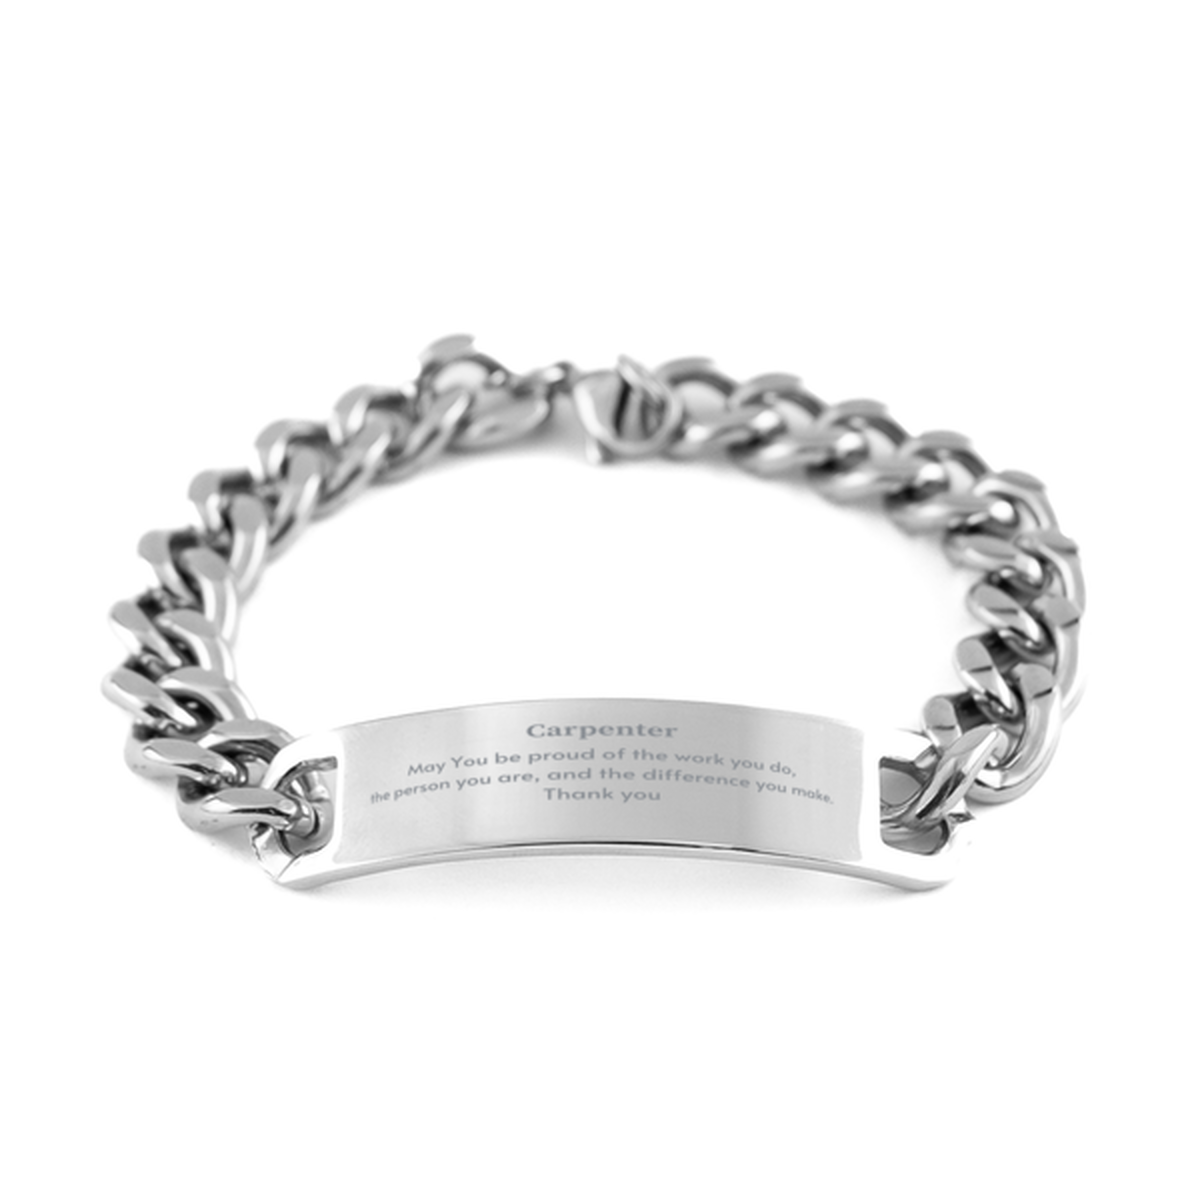 Heartwarming Cuban Chain Stainless Steel Bracelet Retirement Coworkers Gifts for Carpenter, Carpenter May You be proud of the work you do, the person you are Gifts for Boss Men Women Friends